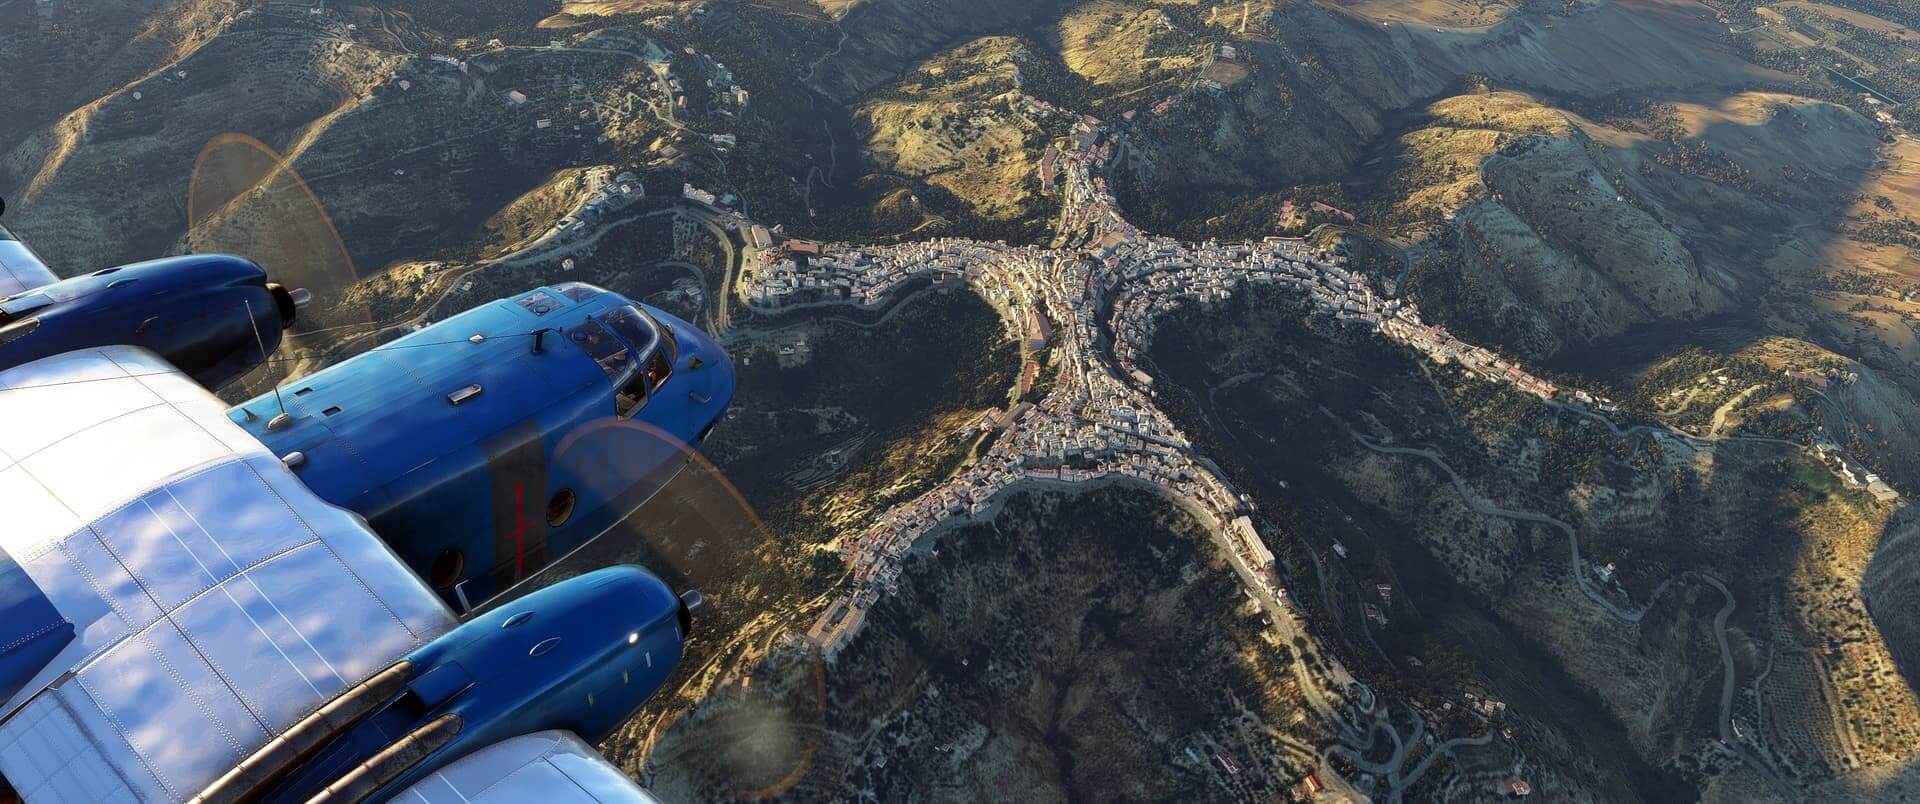 A blue dual-prop high-wing aircraft flies above a city located on top of mountain ridges